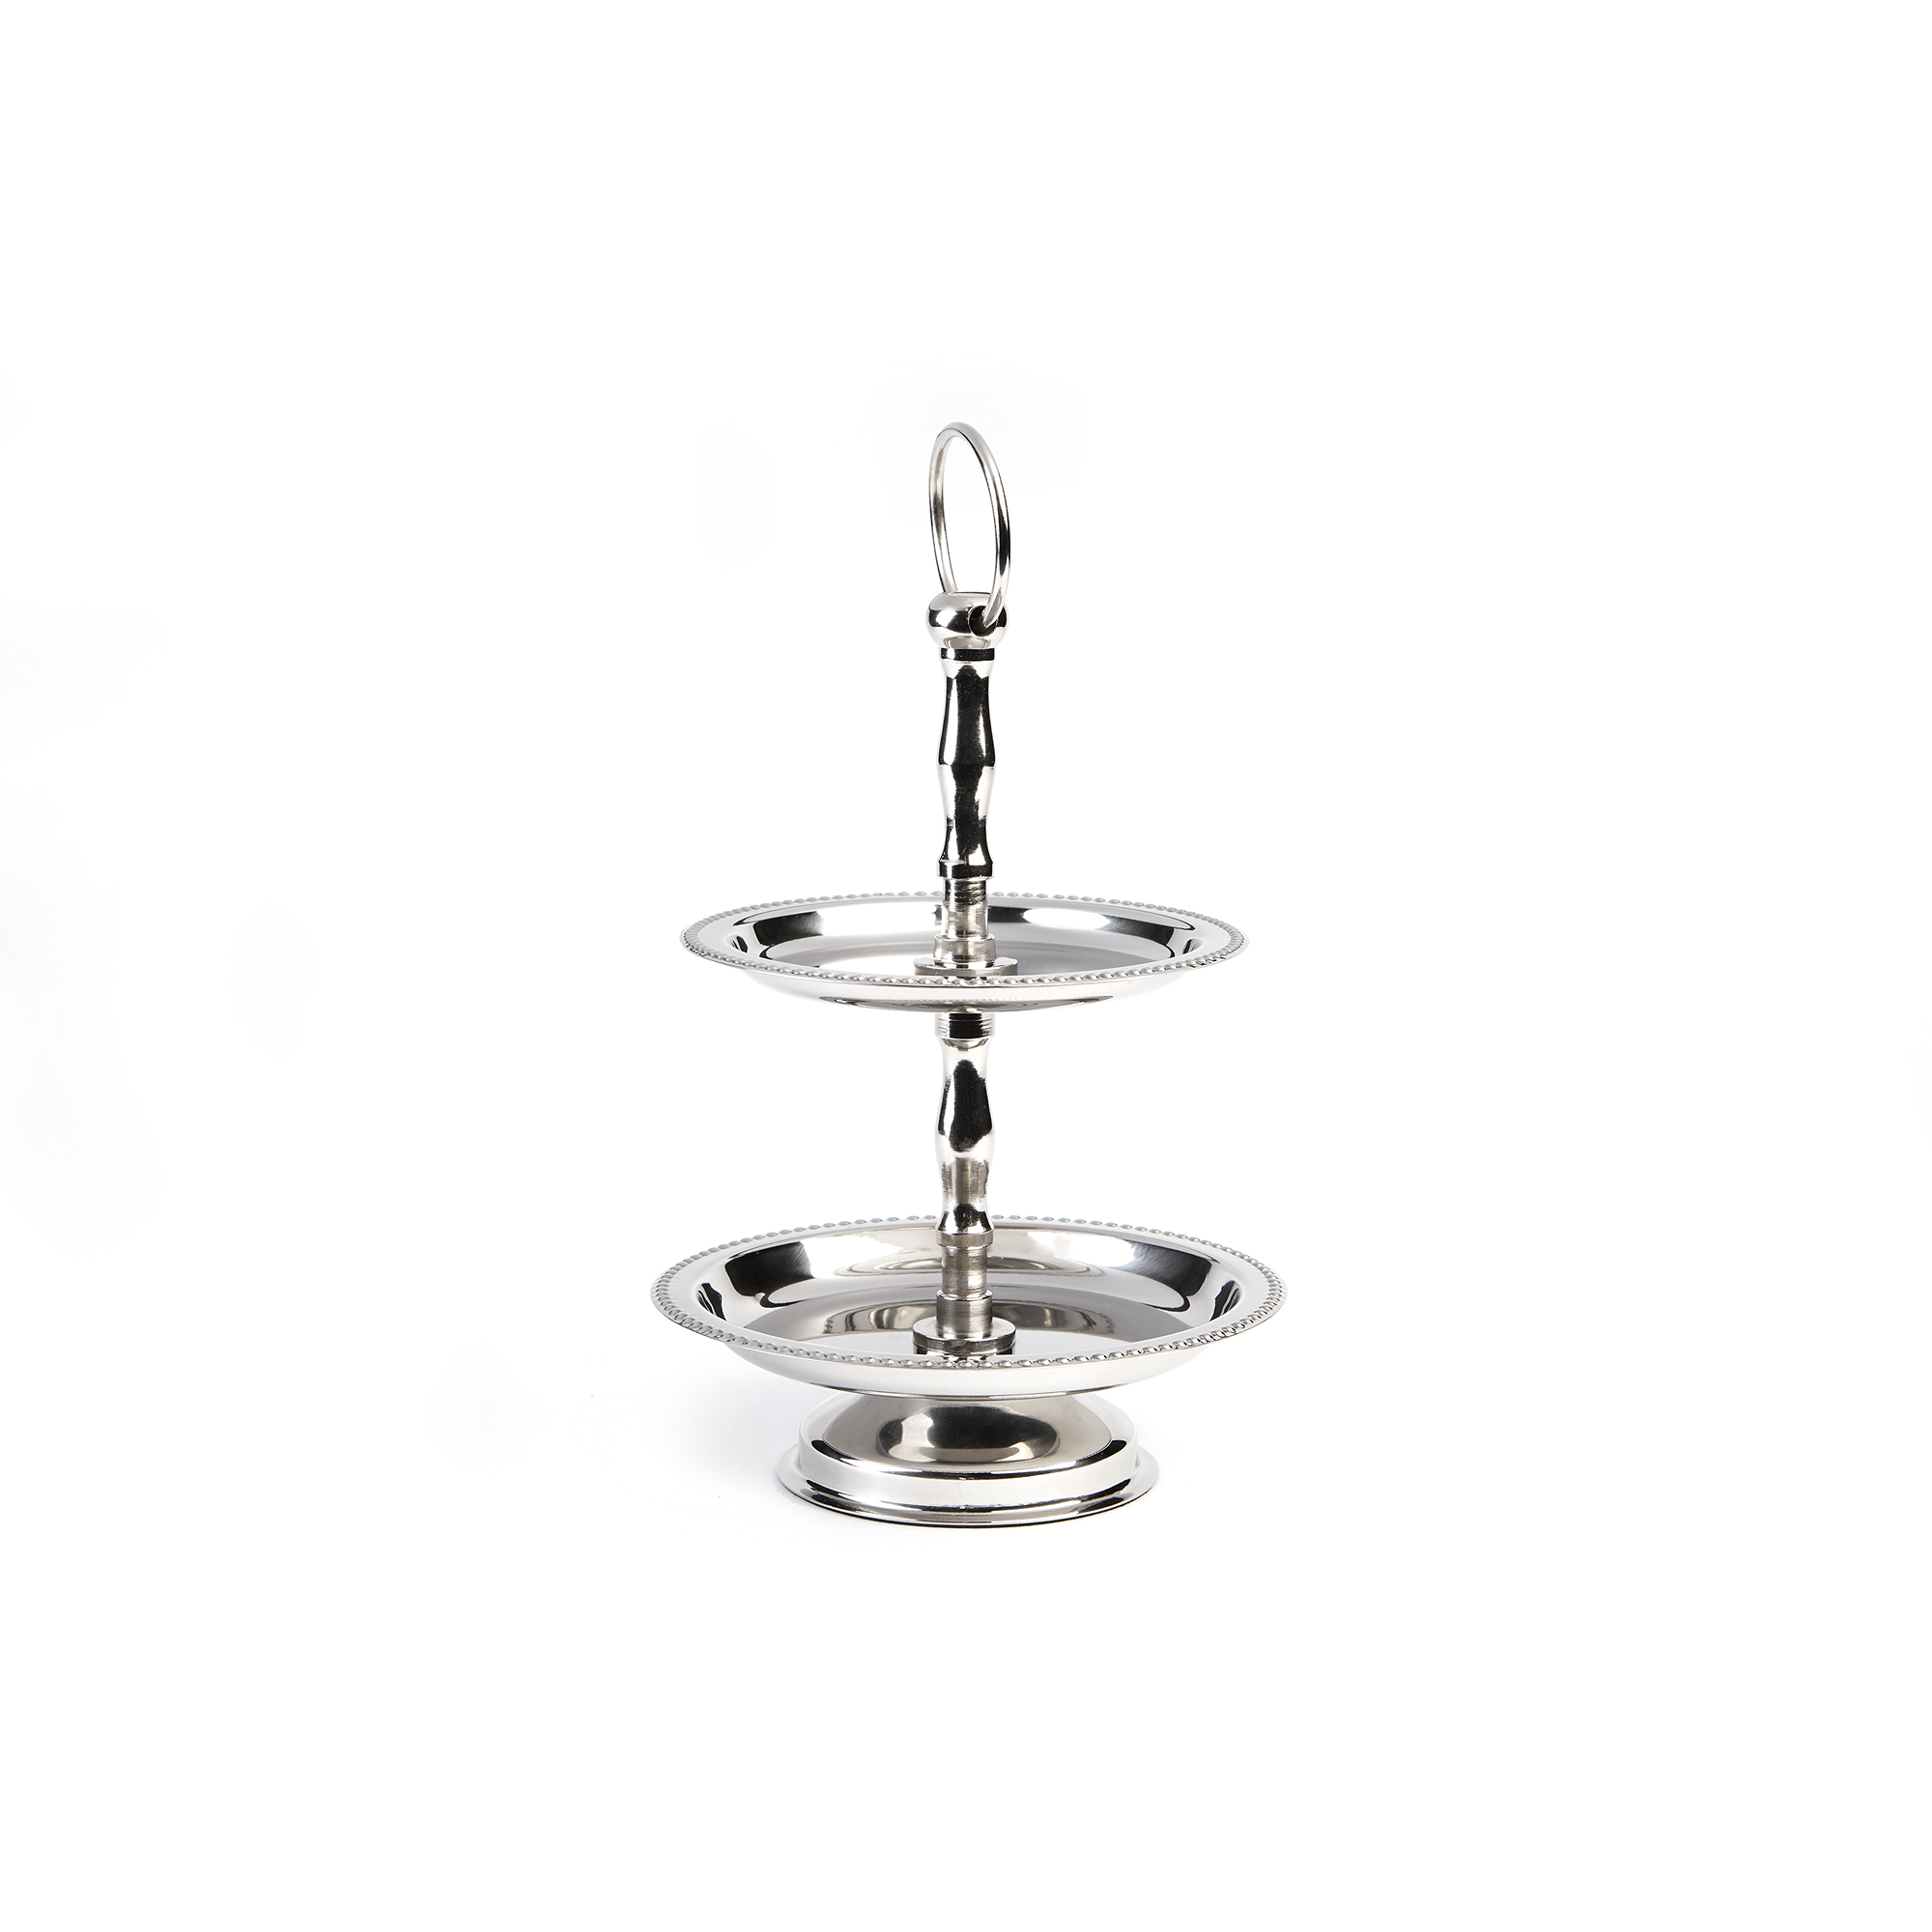 Cake Stands - All About You Rentals